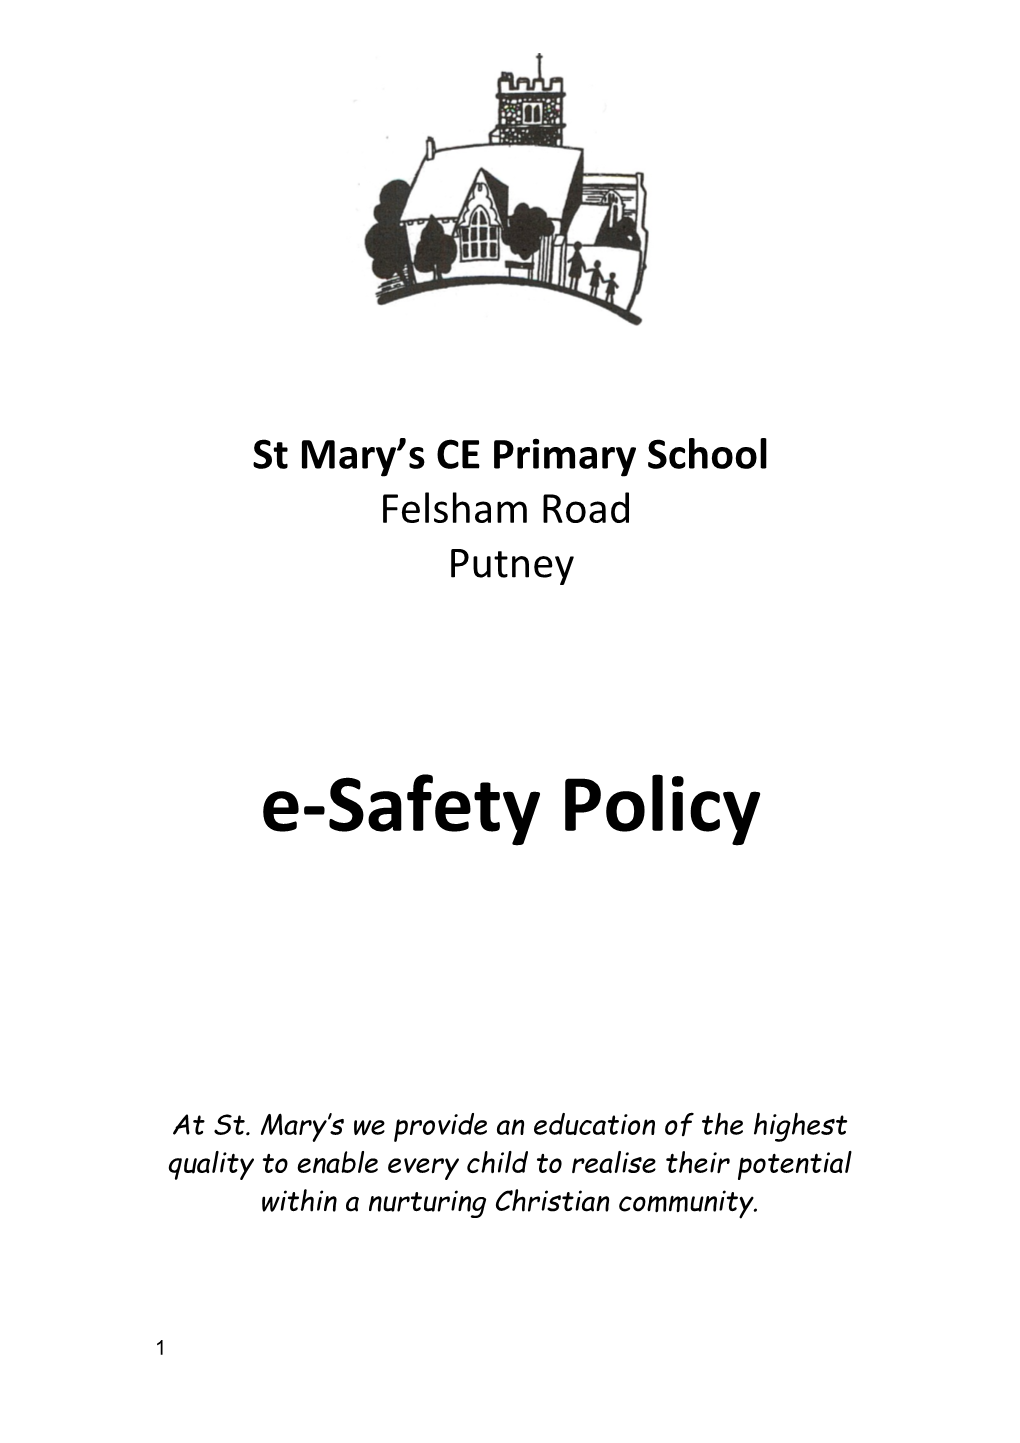 The Main Areas of Risk for Our School Community Can Be Summarised As Follows